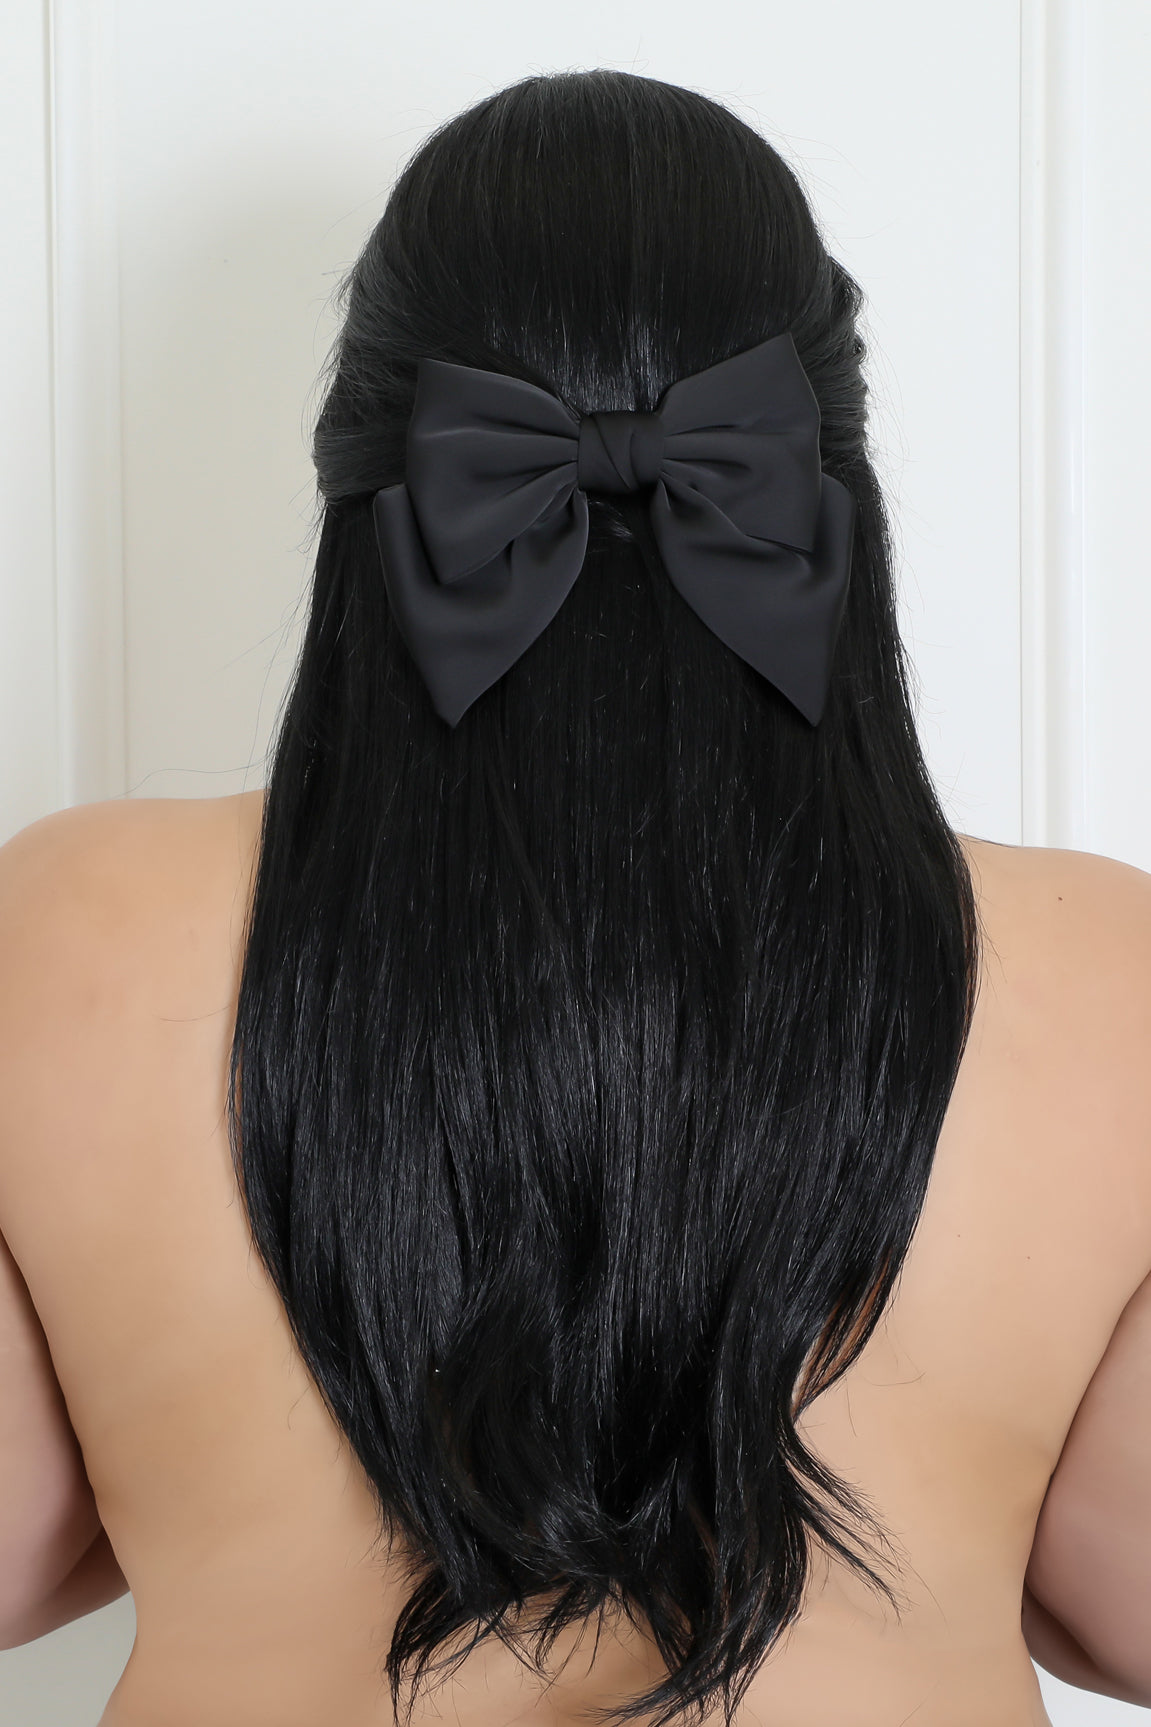 Coquette Girly Bow